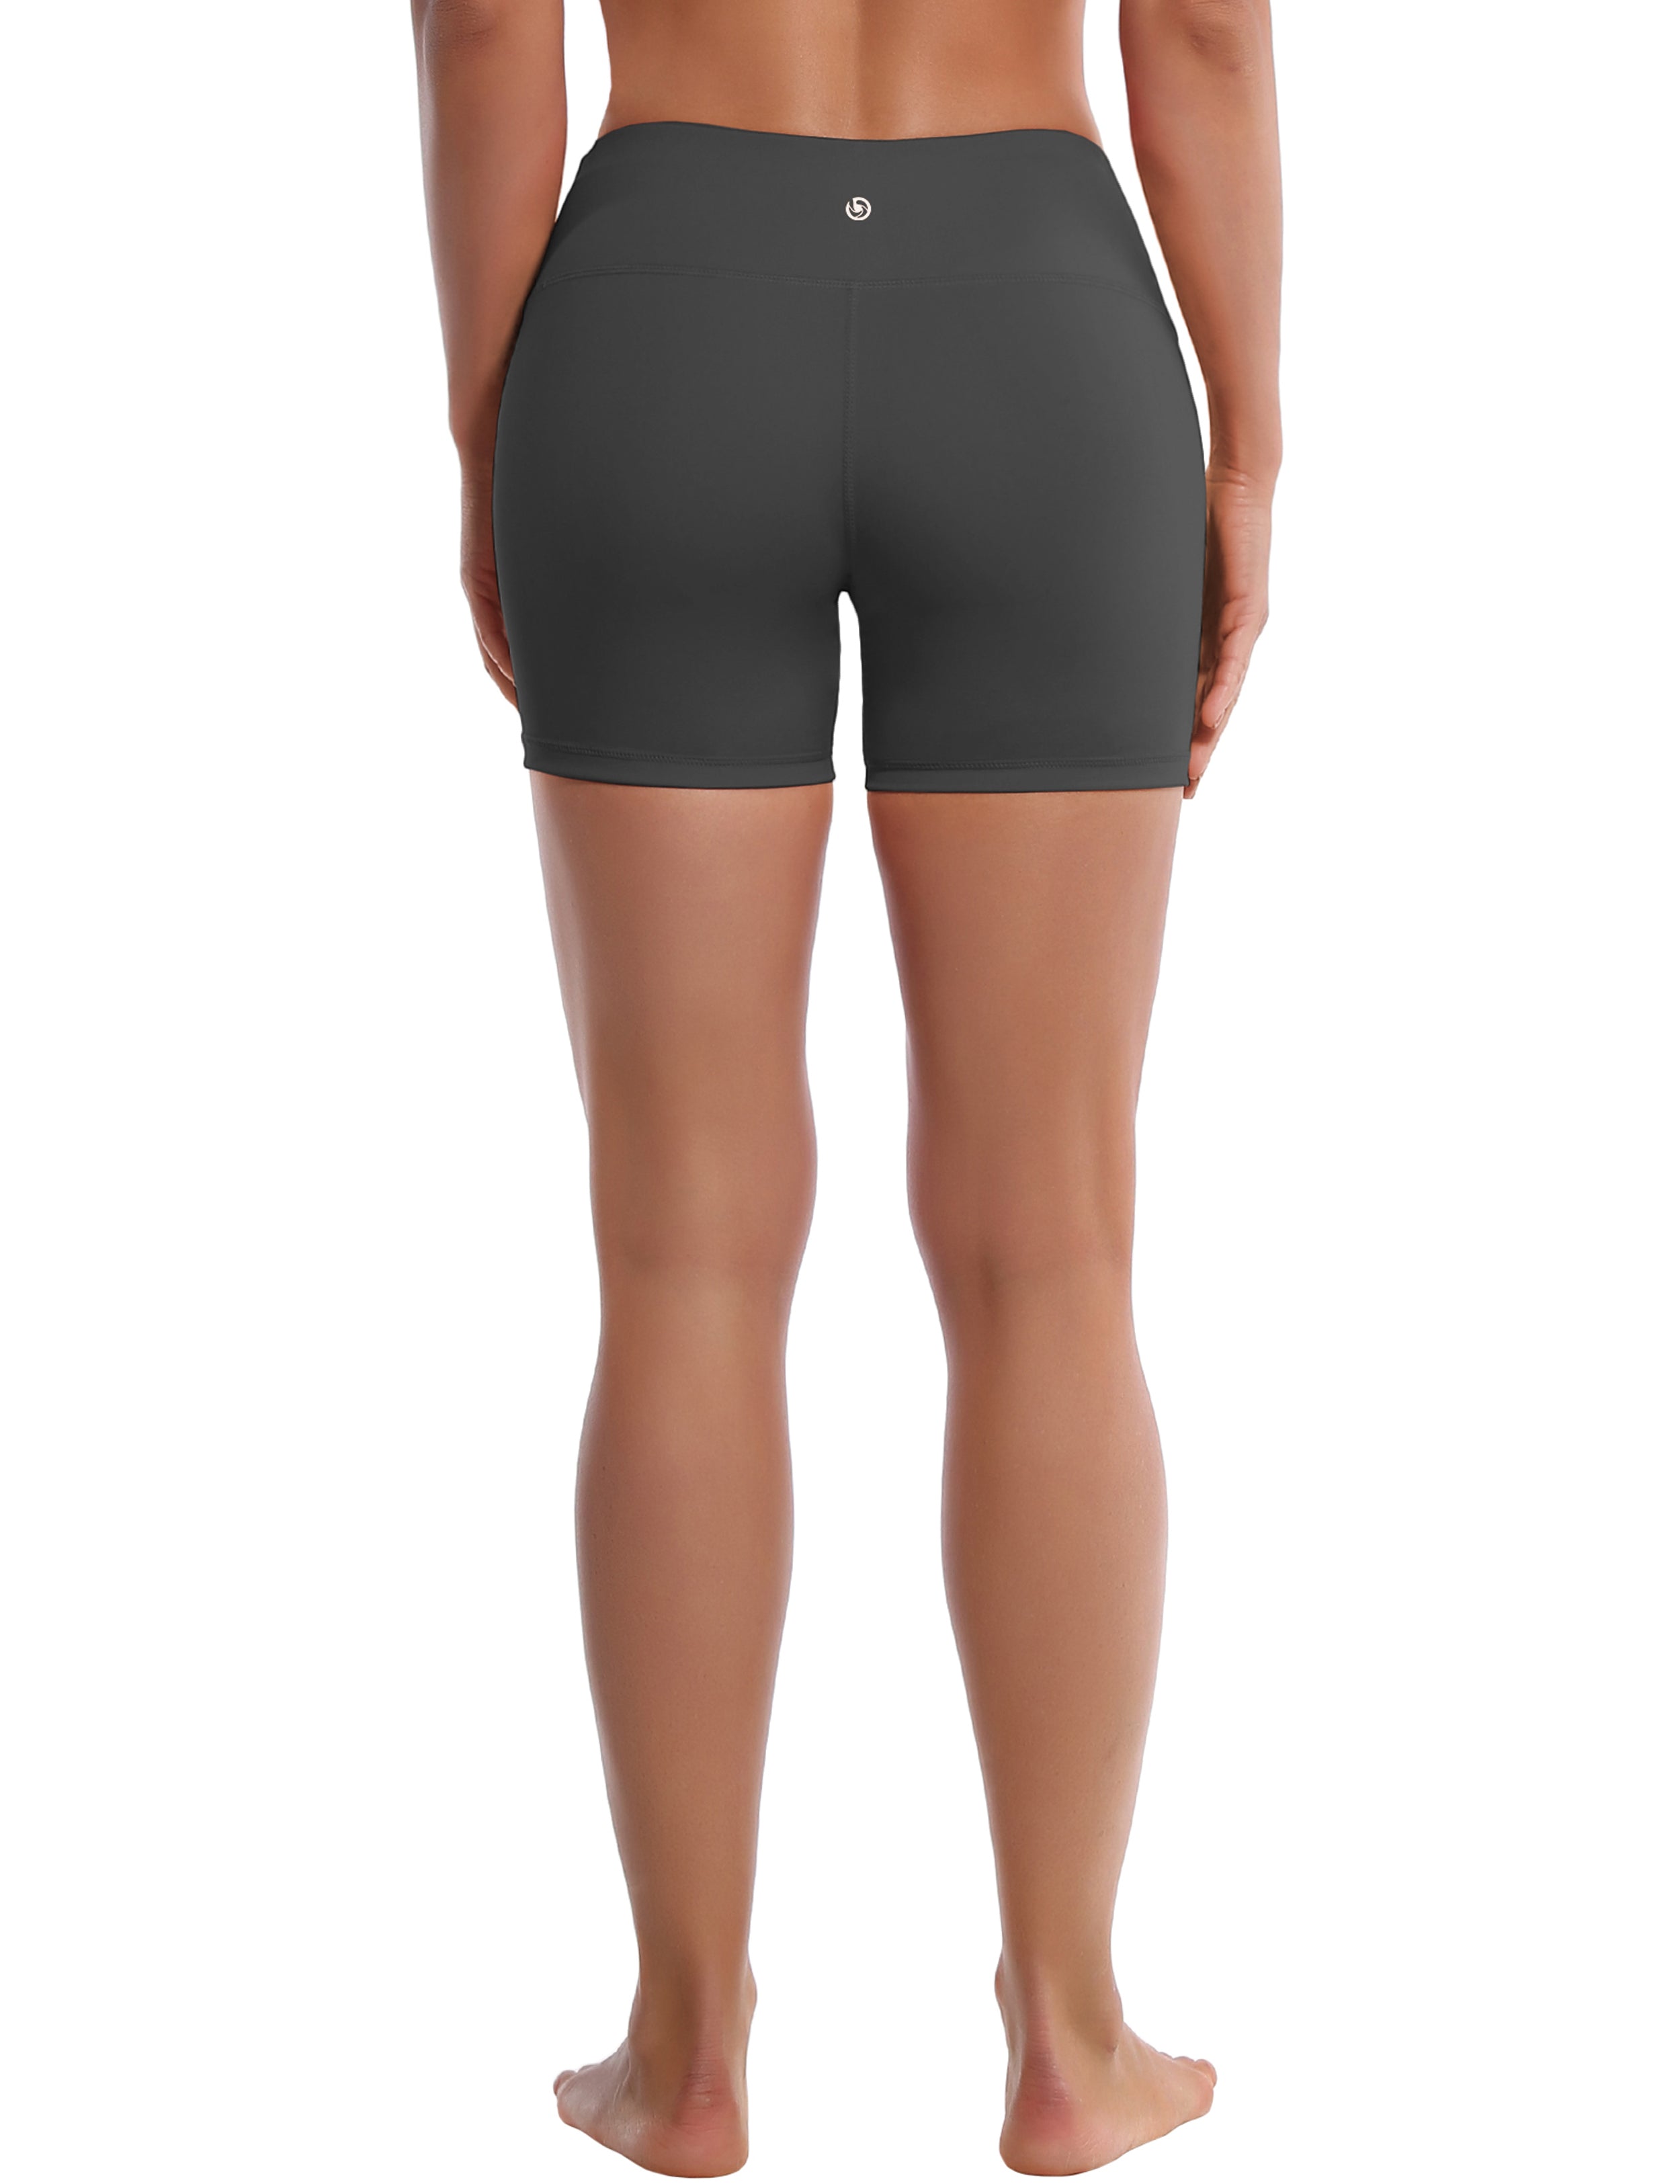 4" Jogging Shorts shadowcharcoal Sleek, soft, smooth and totally comfortable: our newest style is here. Softest-ever fabric High elasticity High density 4-way stretch Fabric doesn't attract lint easily No see-through Moisture-wicking Machine wash 75% Nylon, 25% Spandex